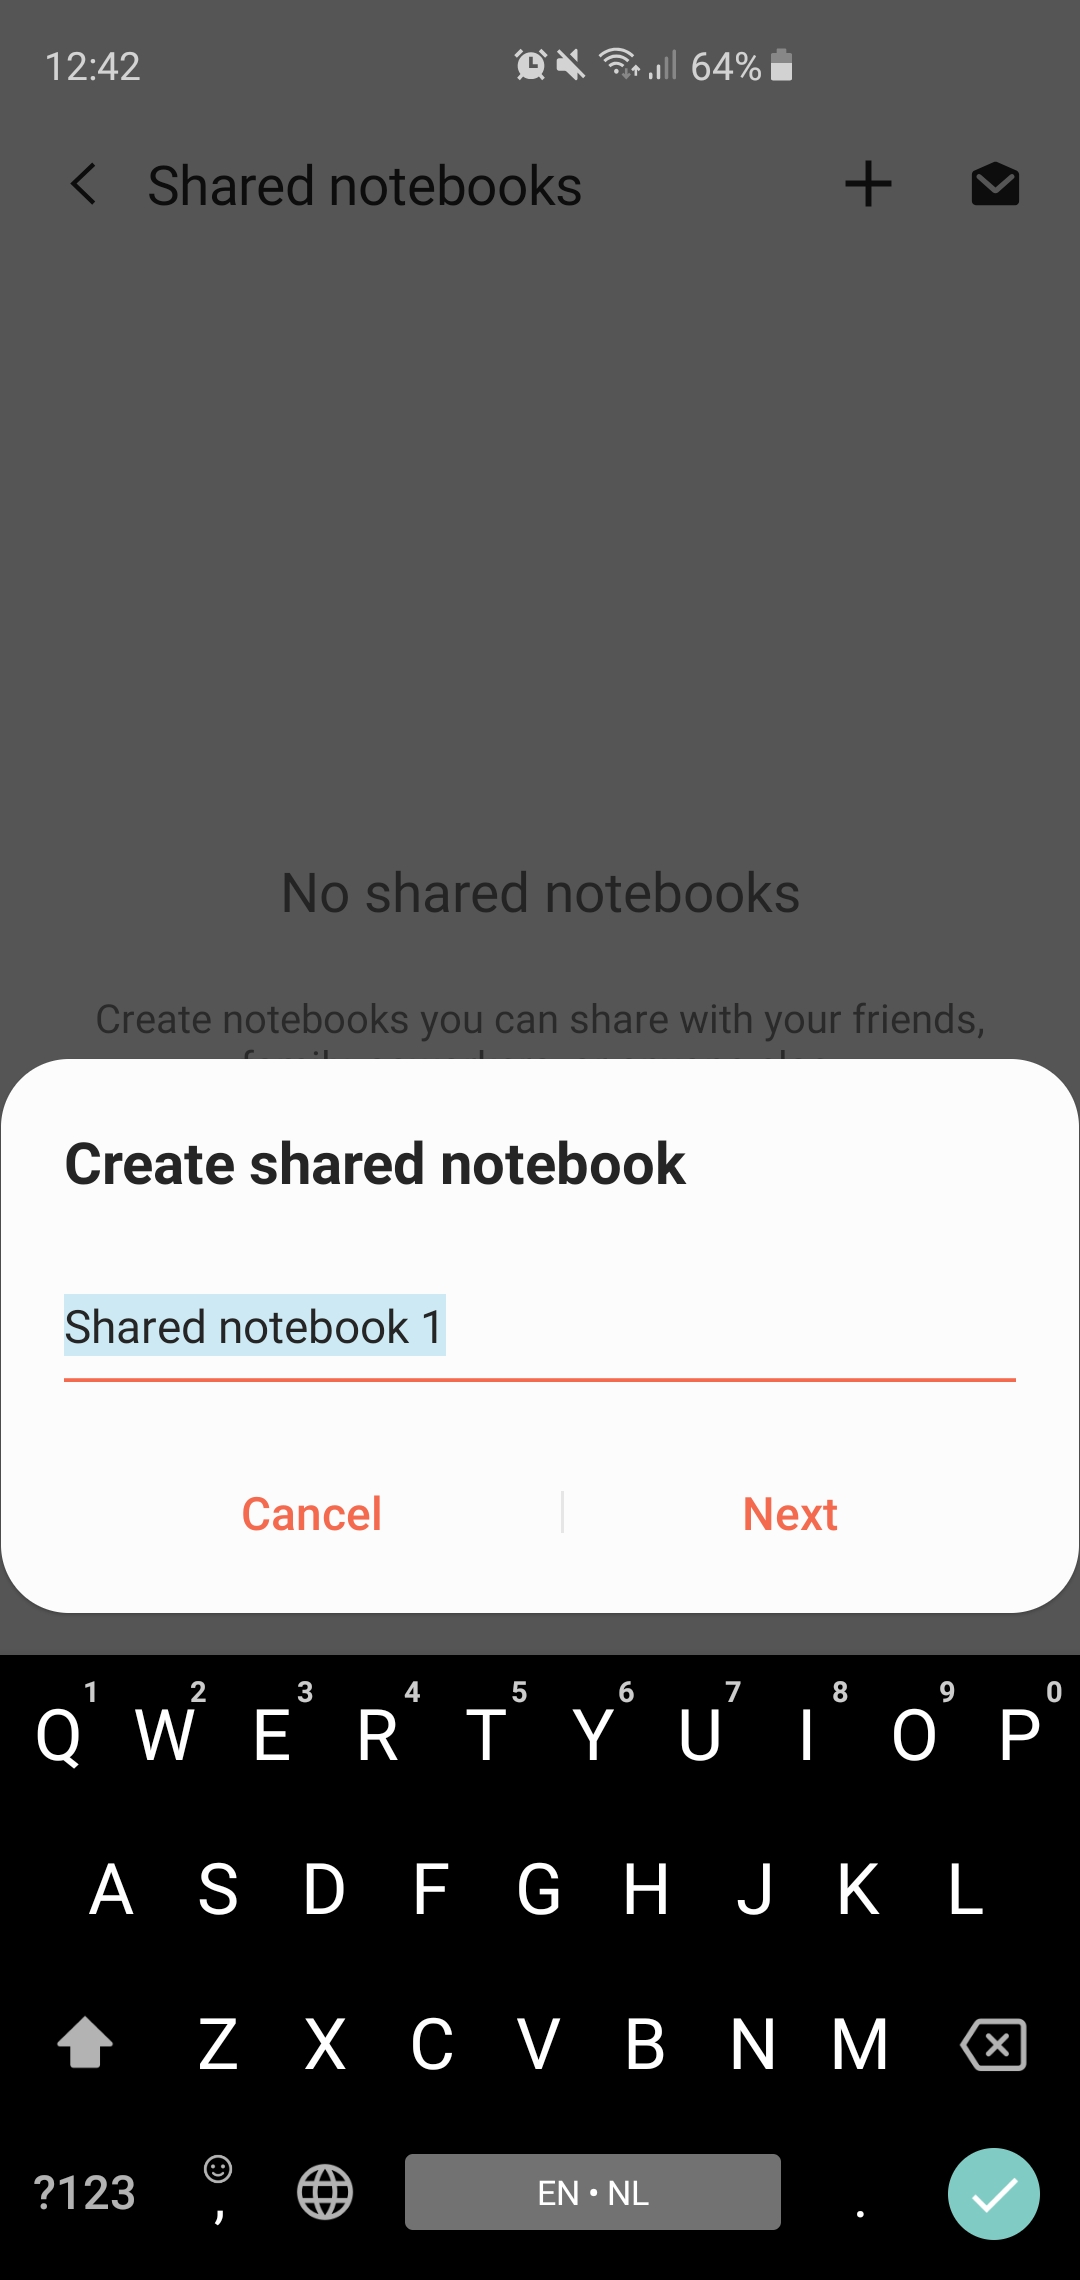 samsung-notes-app-gets-shared-notebooks-feature-in-the-latest-update-sammobile